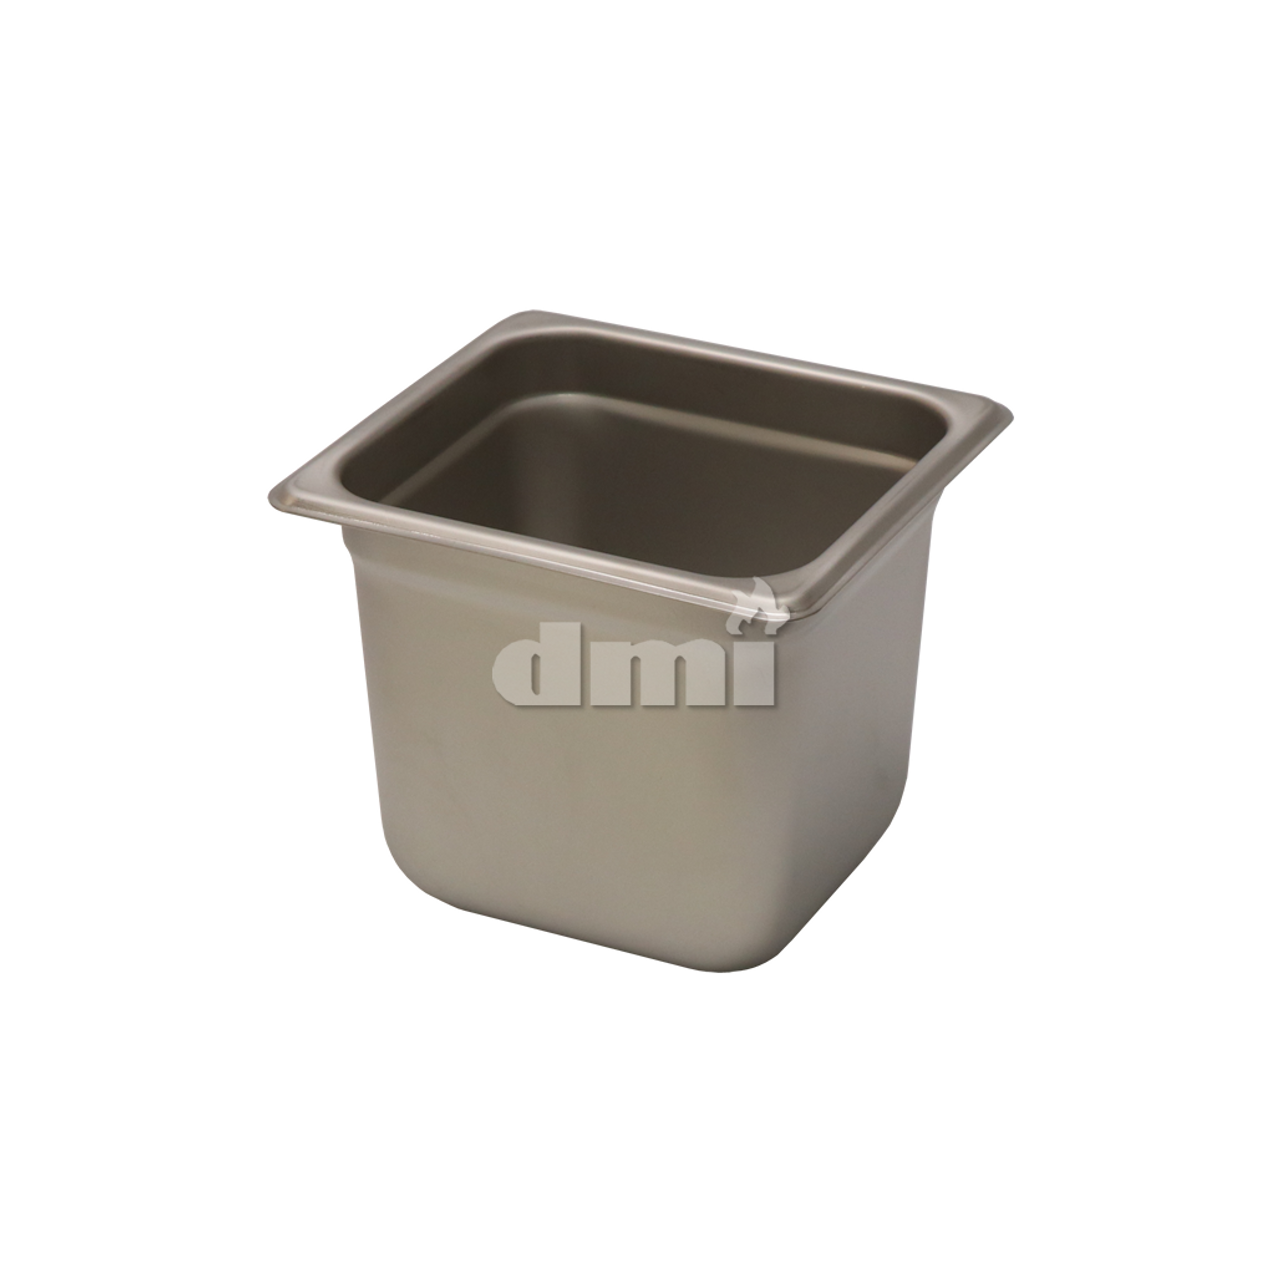 8766-6  1/6 Size Stainless Steel Pan, 6" Deep